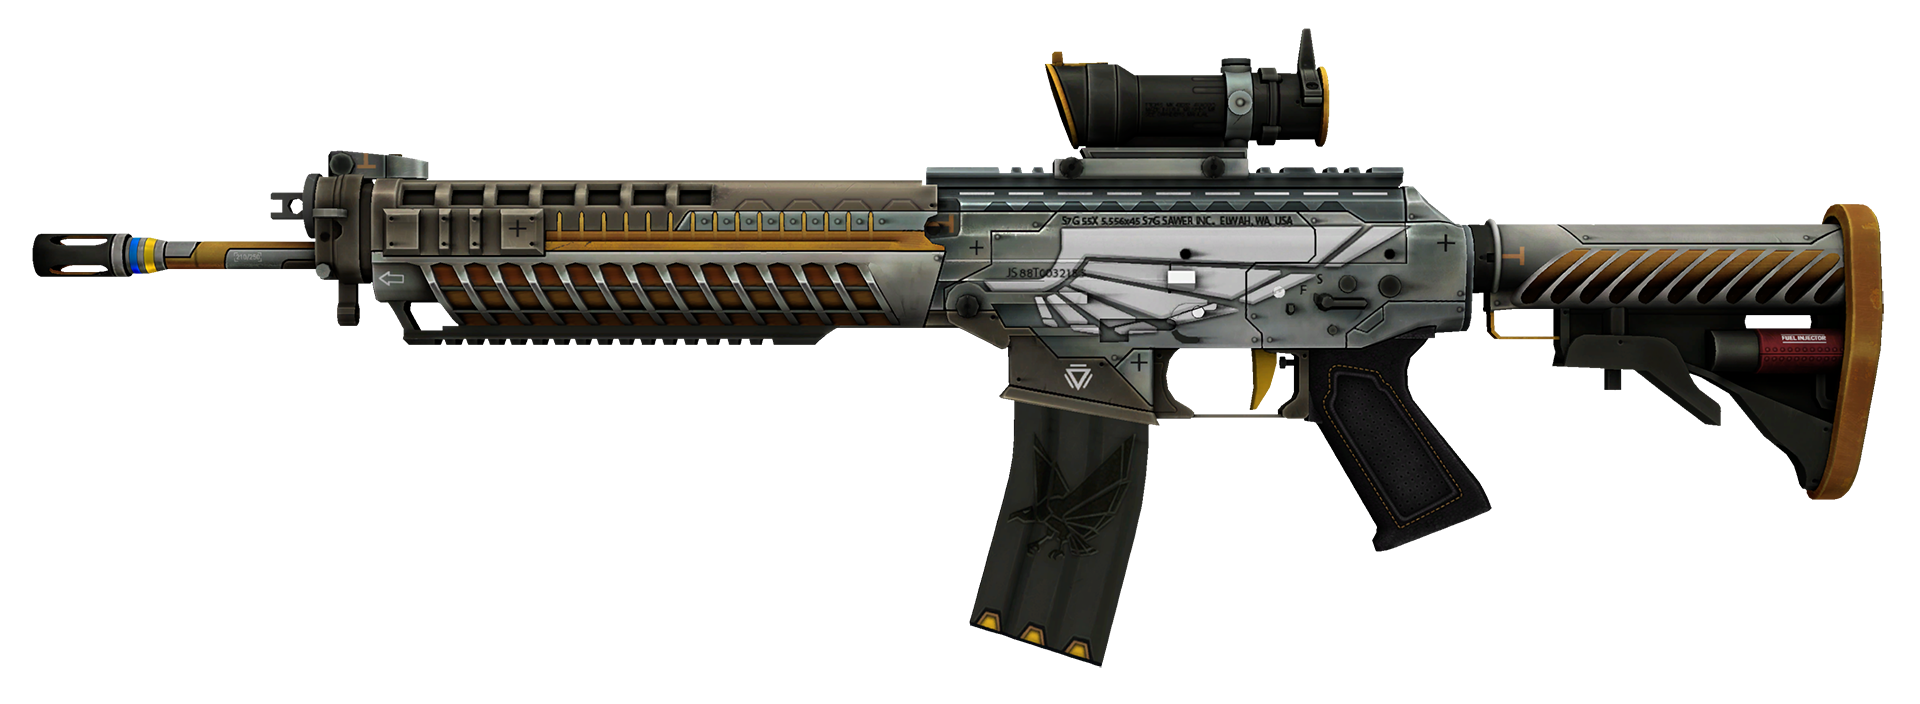 SG 553 Aerial cs go skin download the last version for ipod